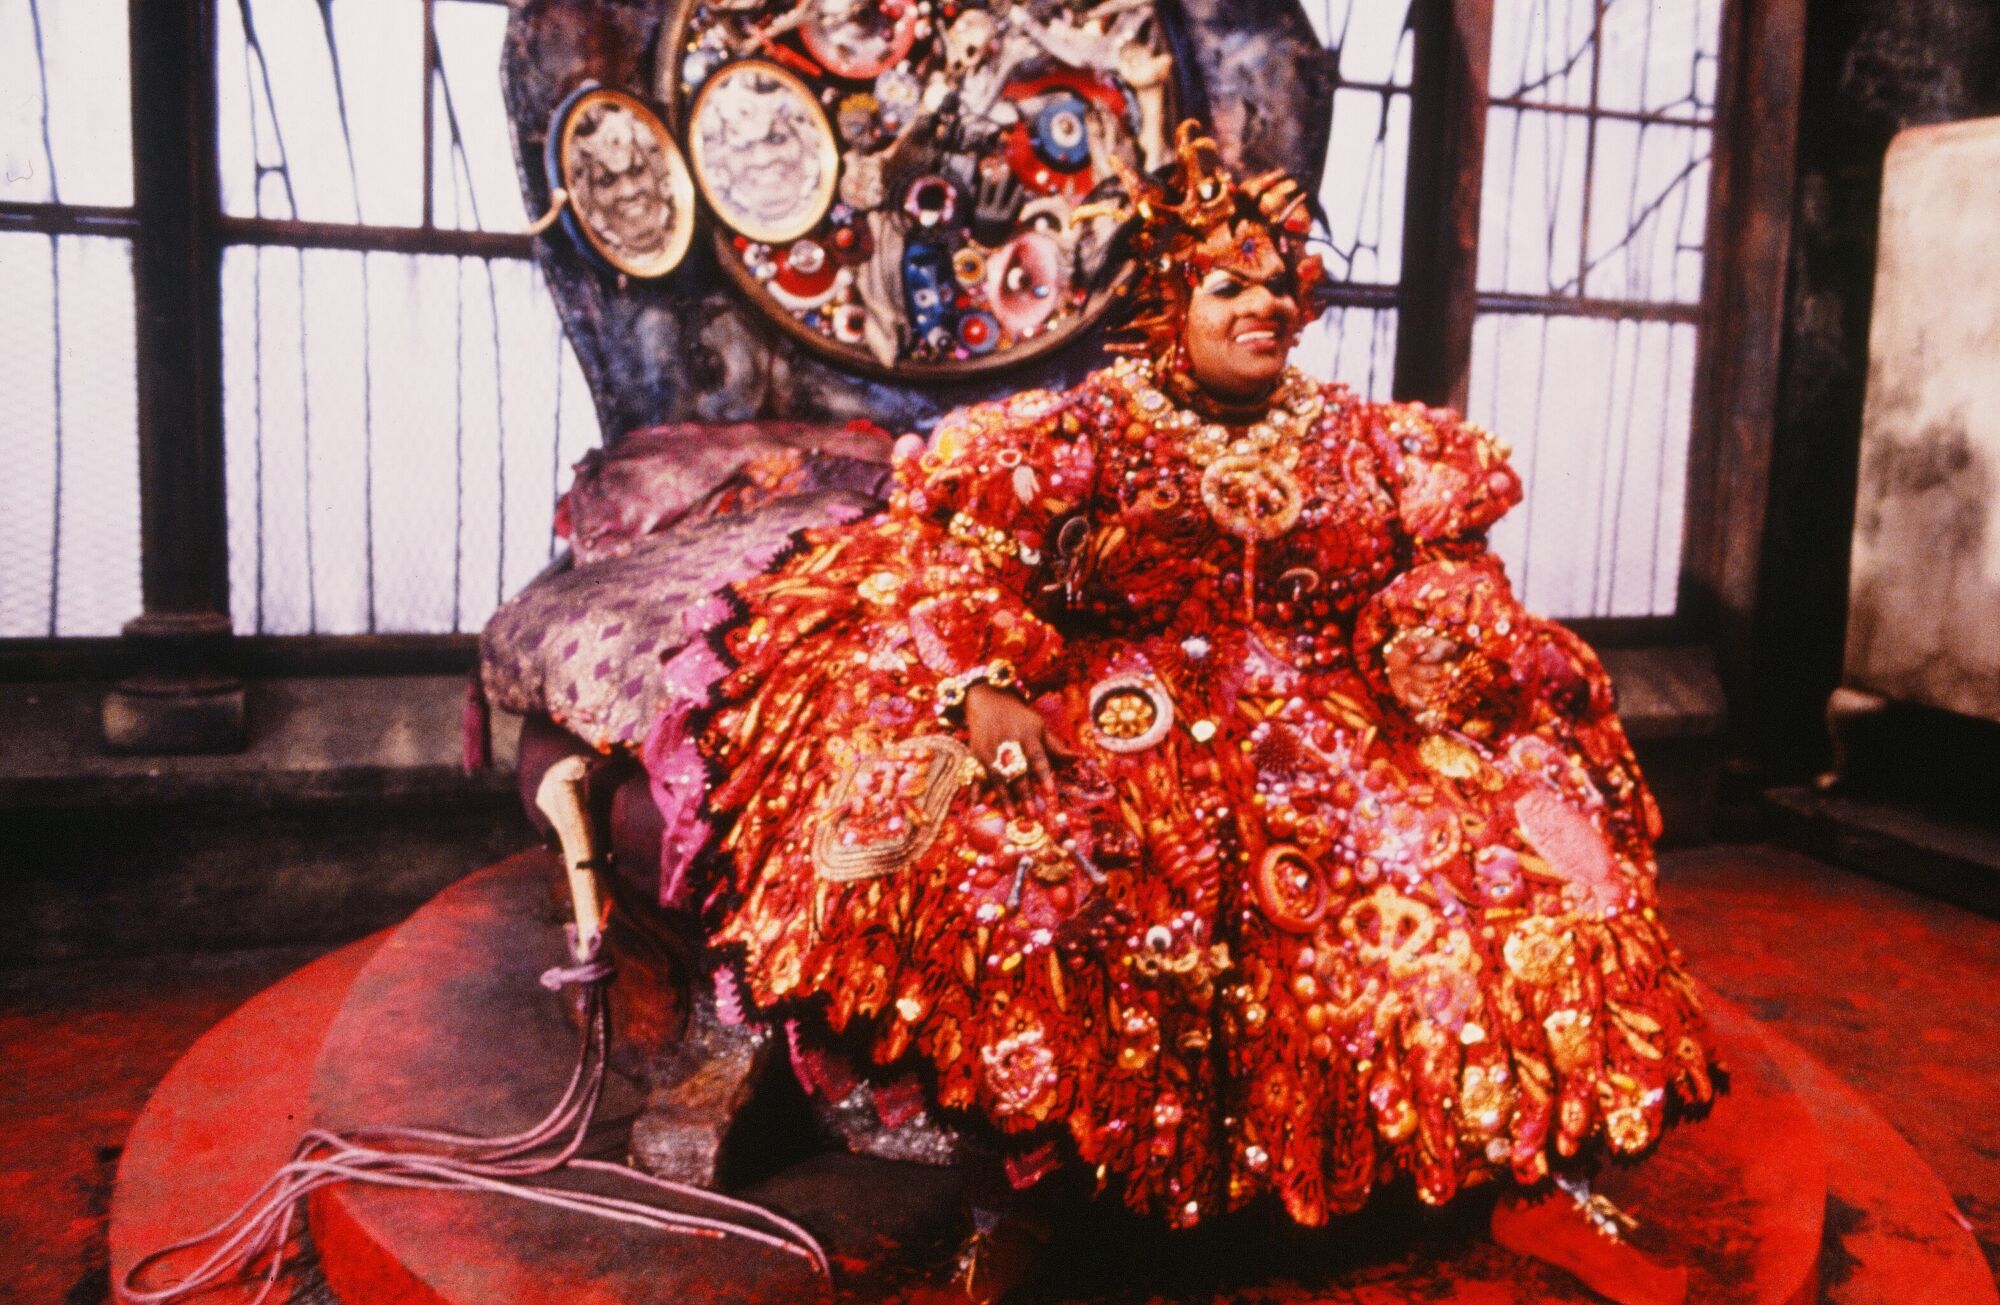 Mabel King as Evillene wears a highly decorated red dress in Sidney Lumet's 1978 film "The Wiz."